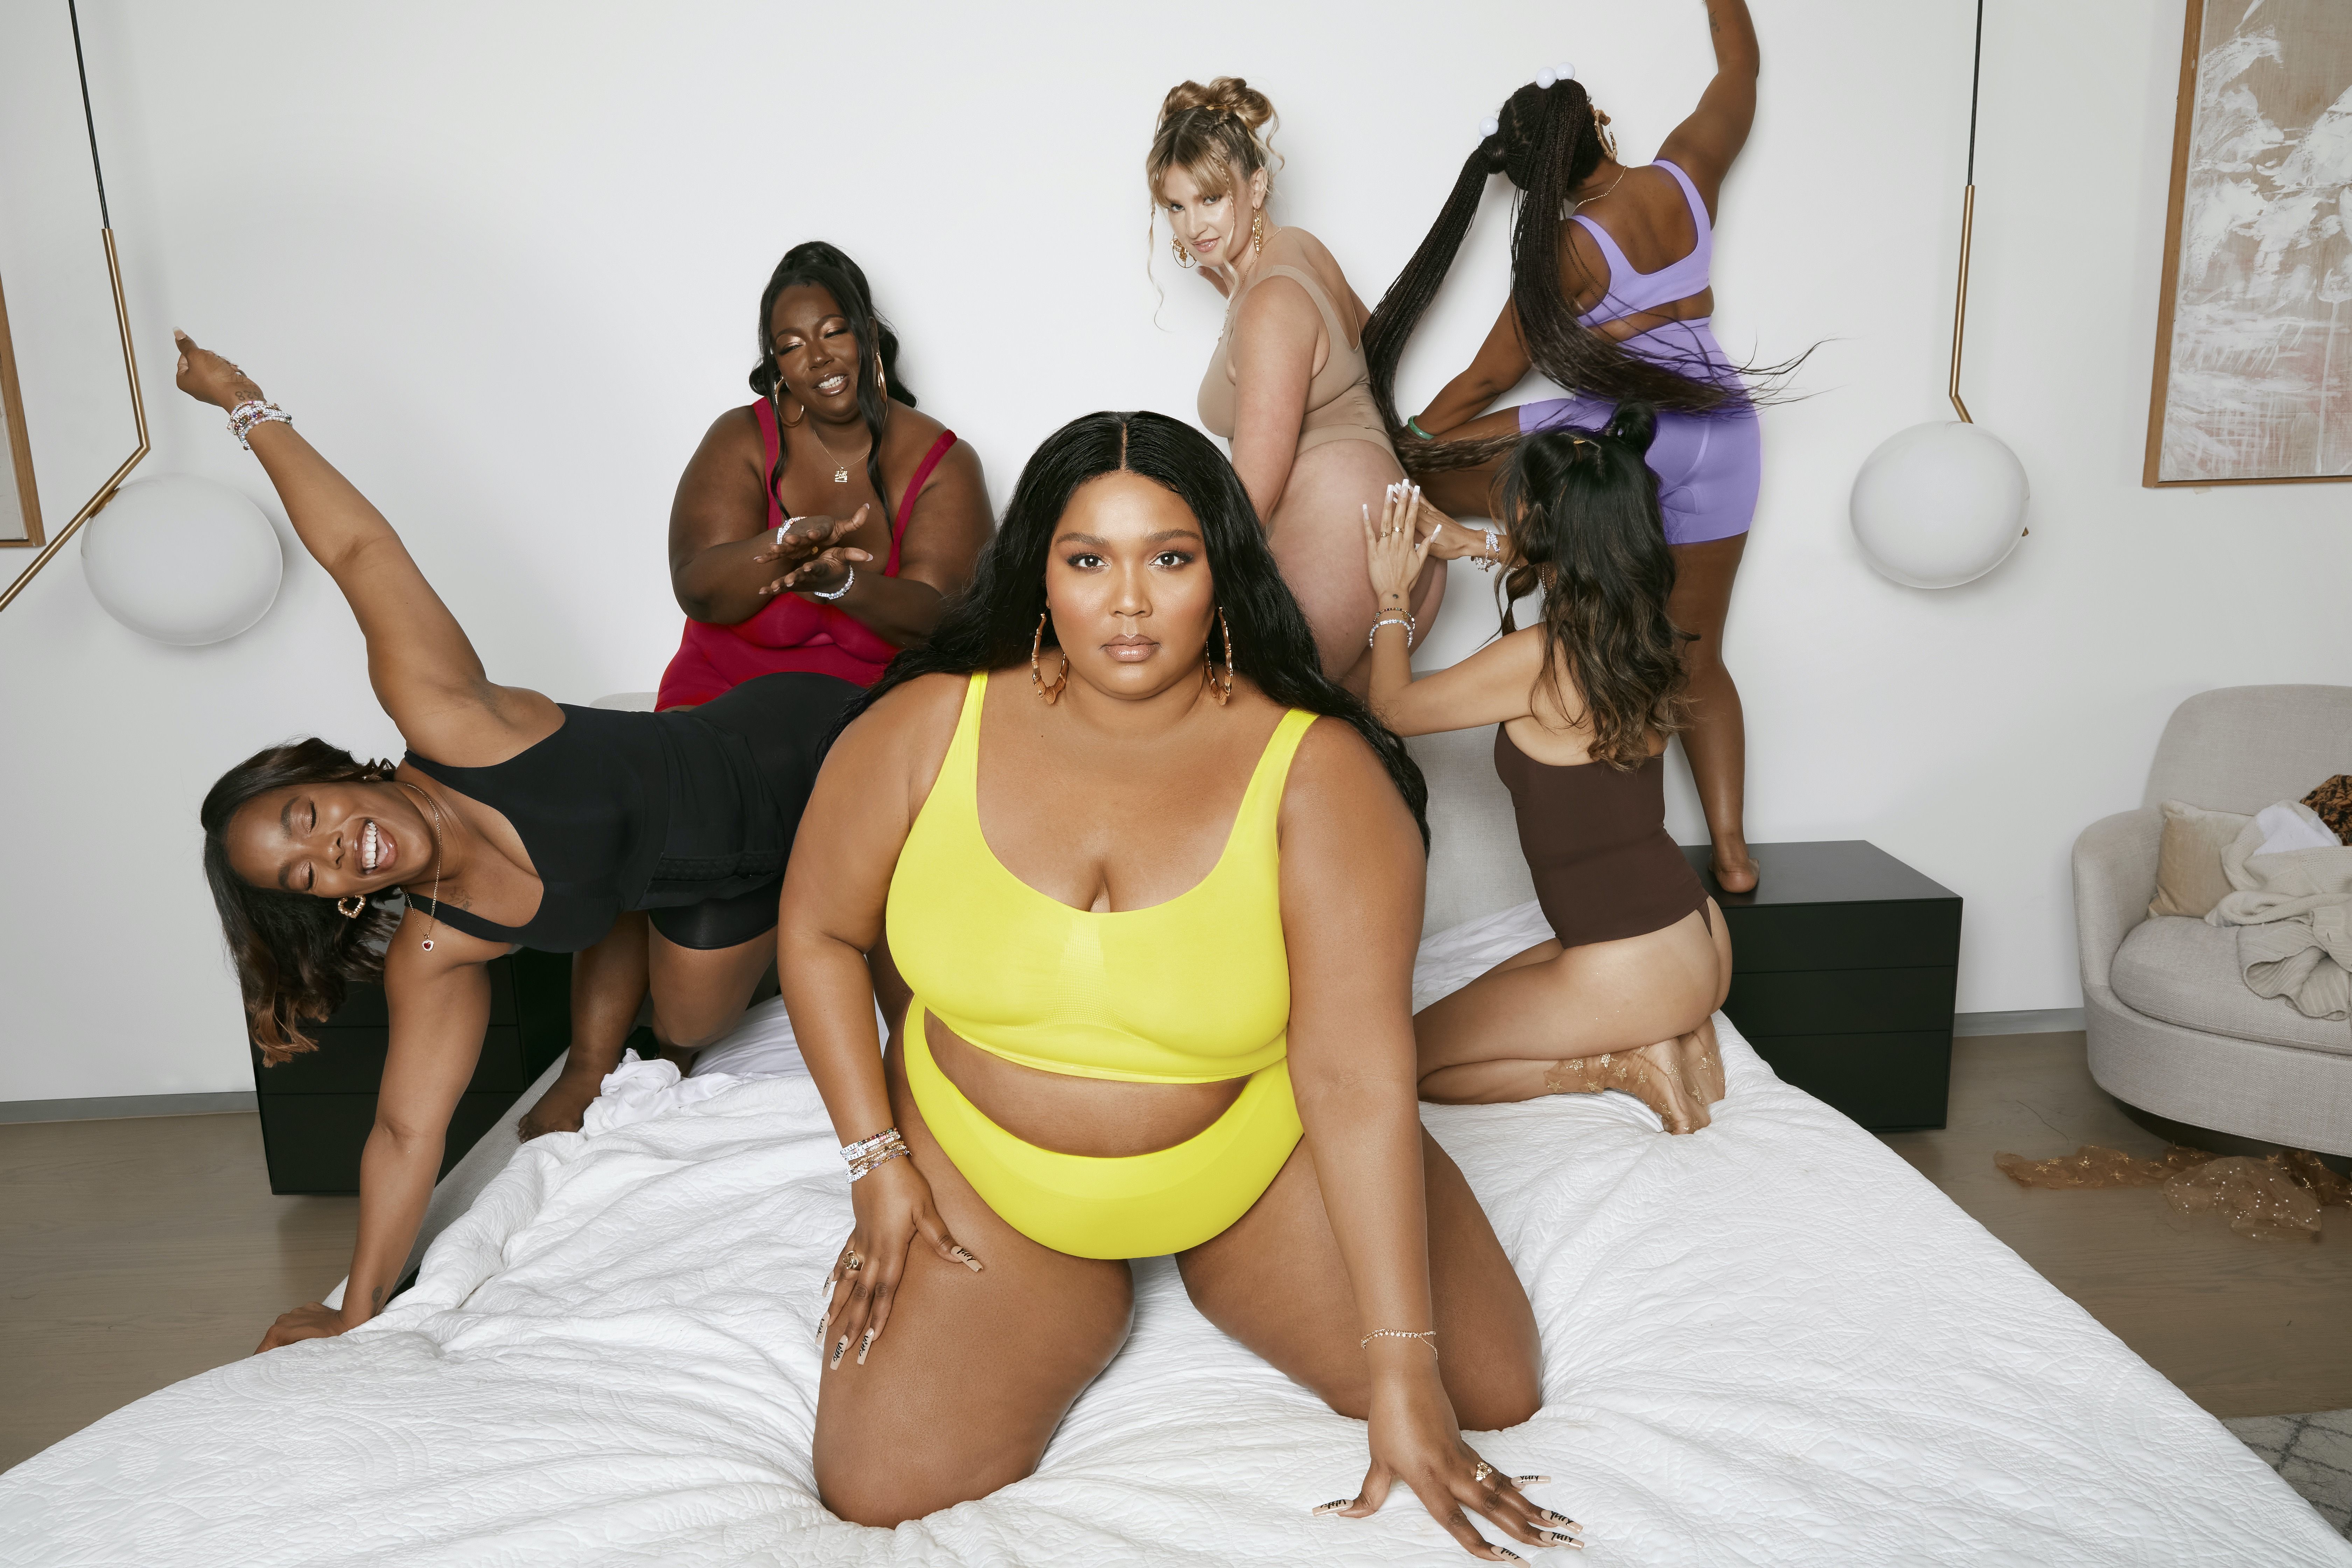 I styled Spanx shapewear as clothing, here's how it went